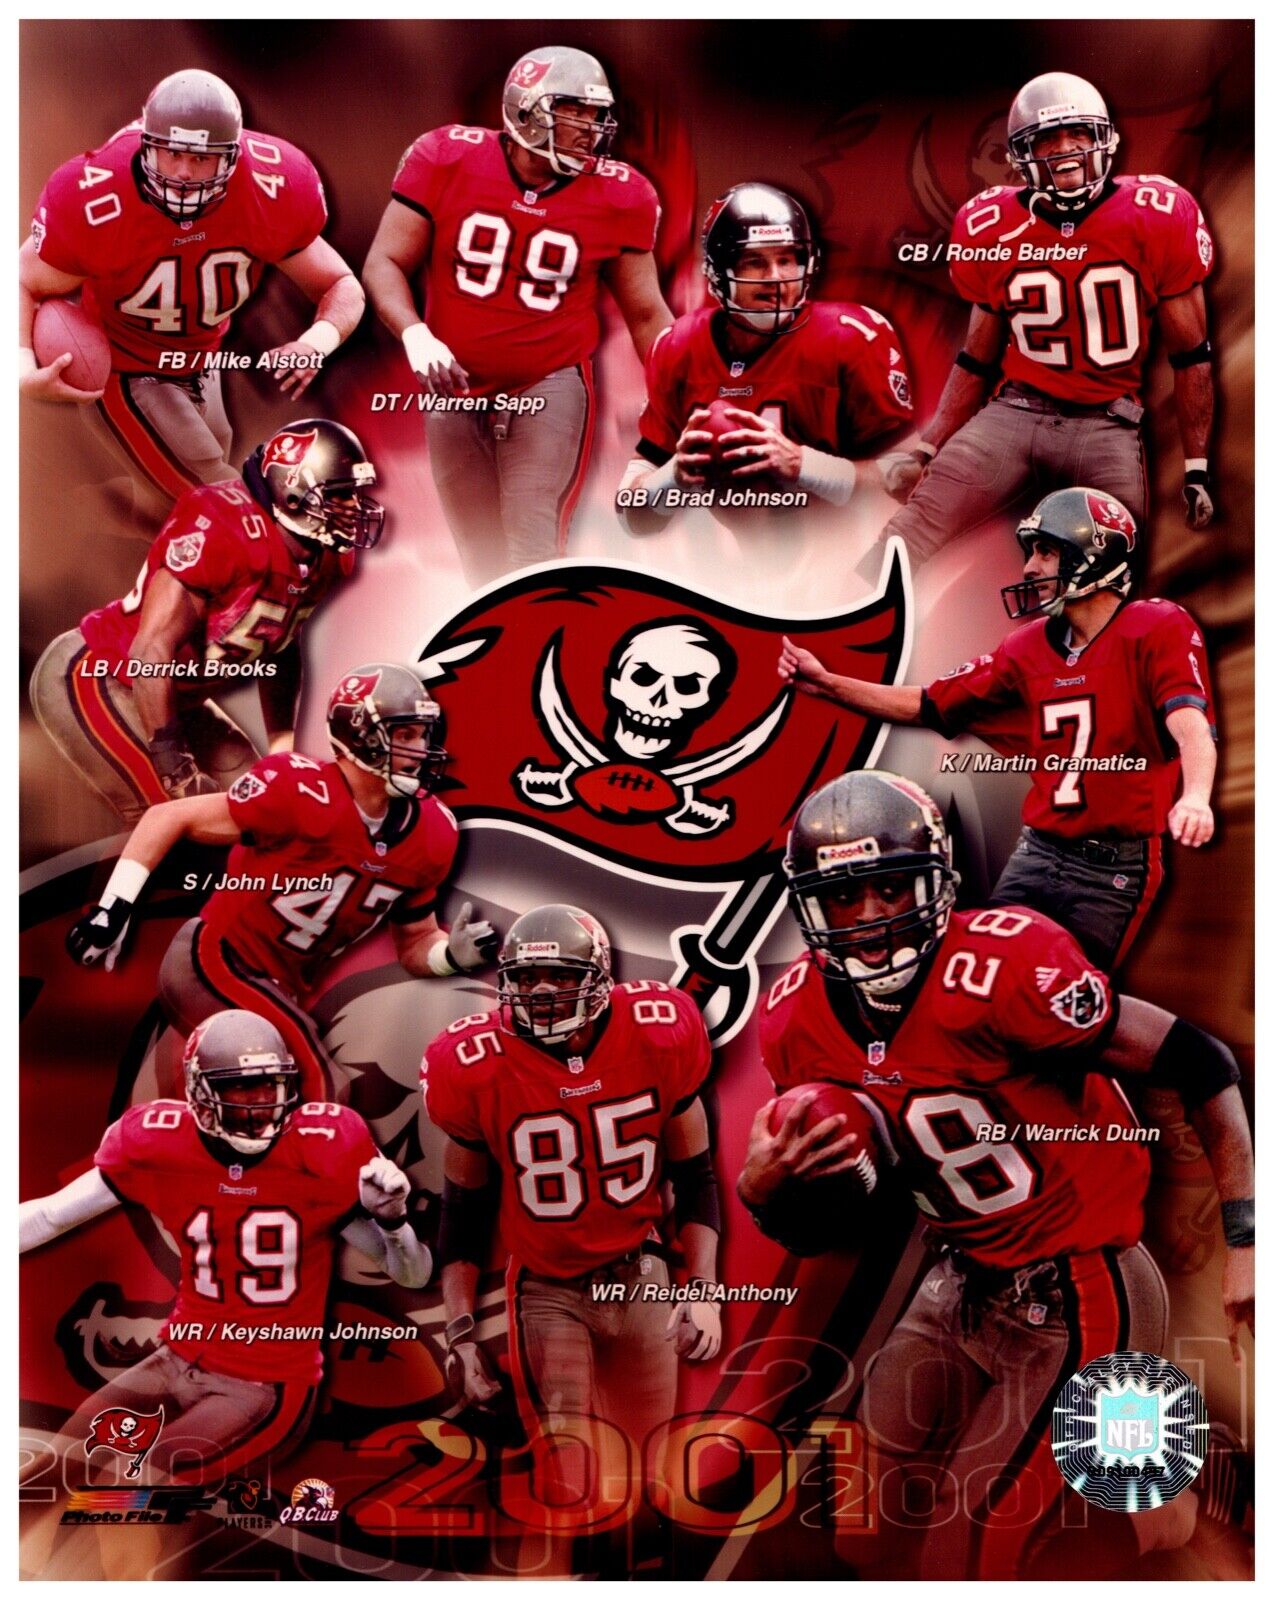 2001 Tampa Bay Buccaneers Unsigned Photo File Team Composite 8x10 Hologram Photo